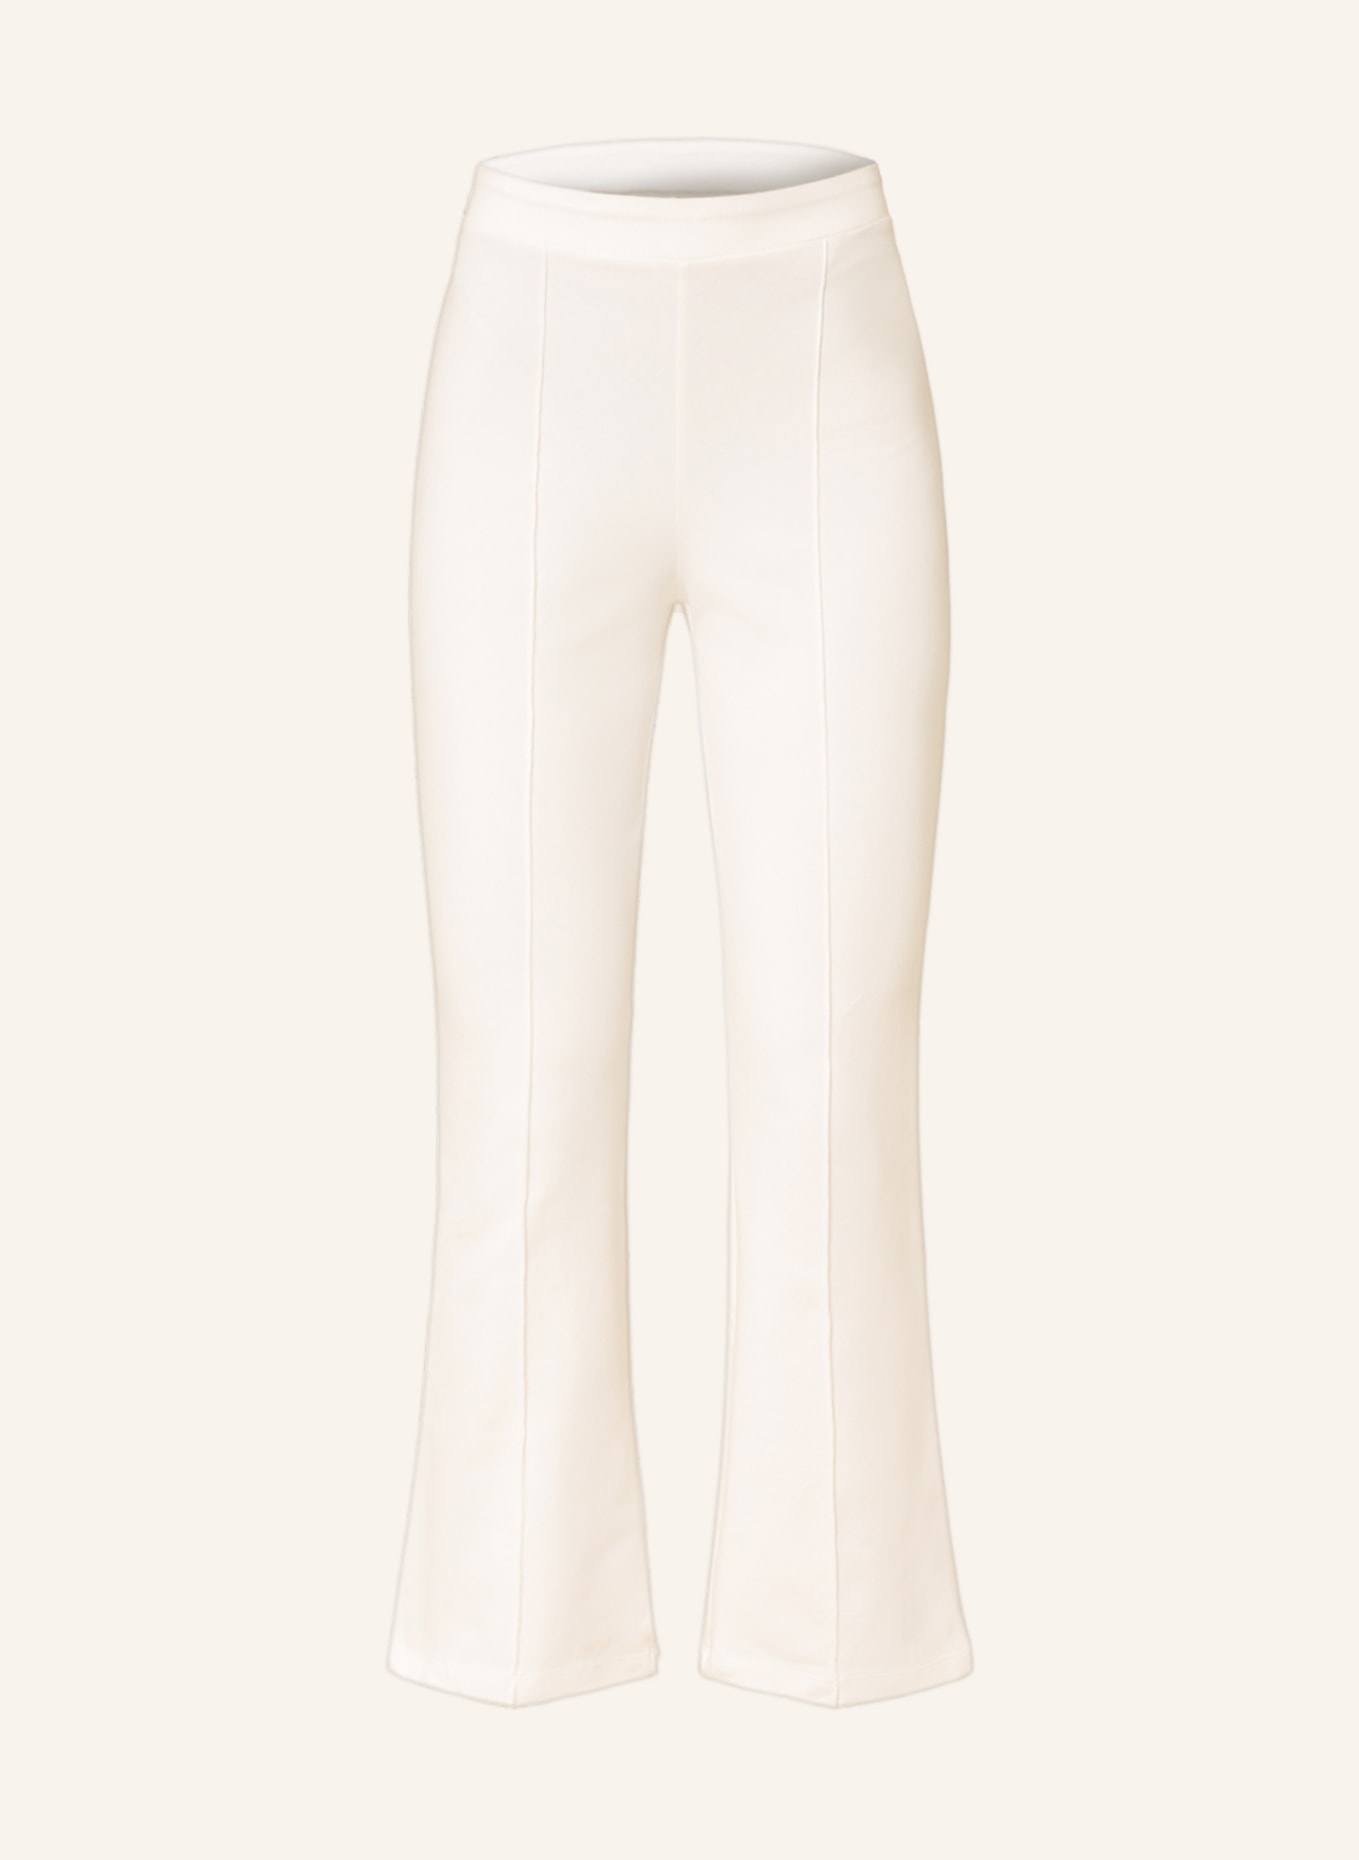 LIU JO 7/8 pants in jogger style, Color: WHITE (Image 1)